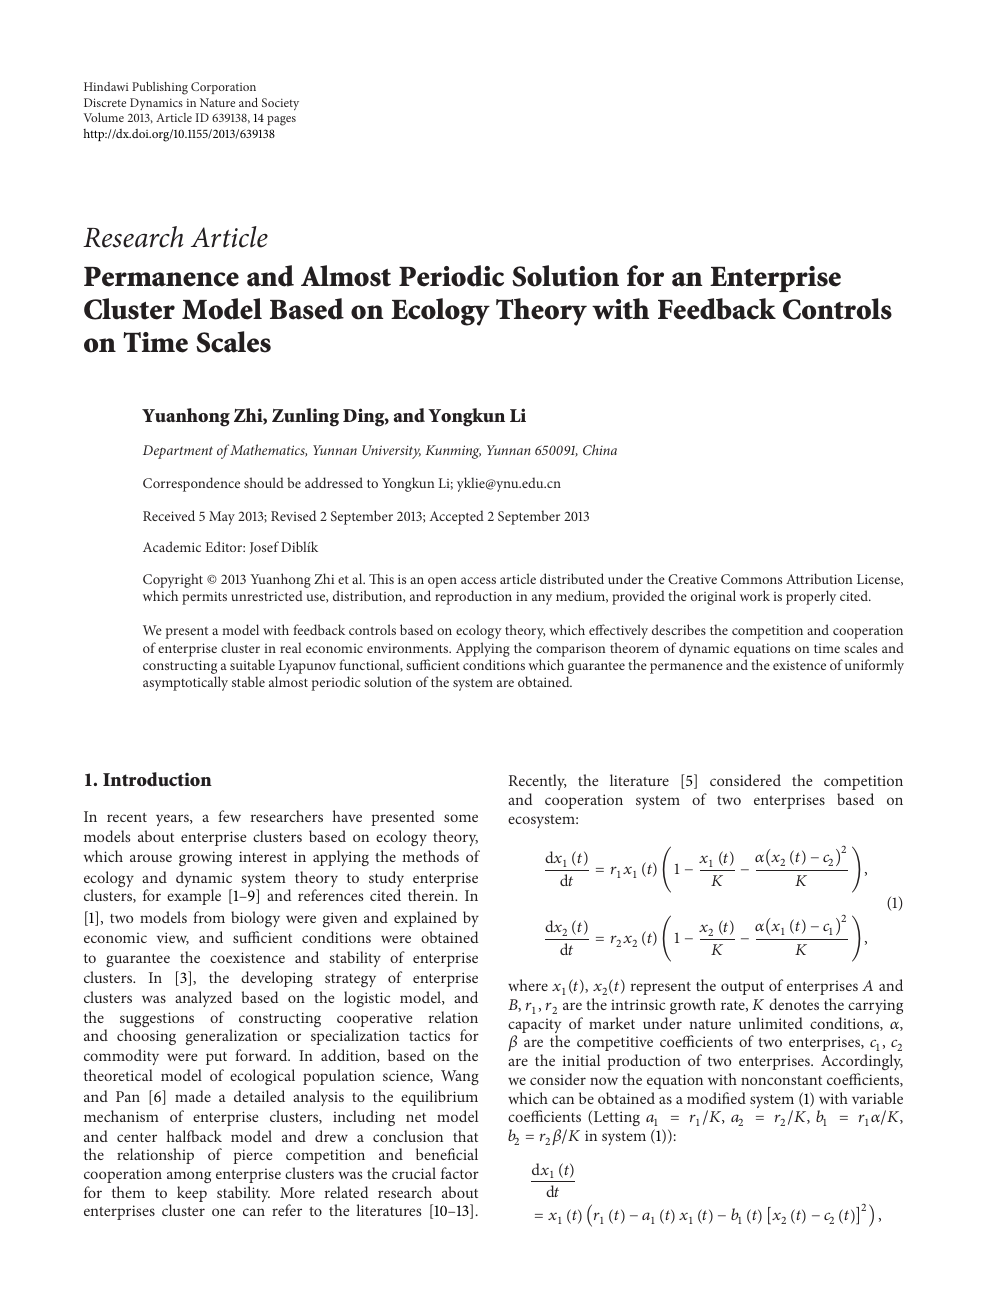 Permanence And Almost Periodic Solution For An Enterprise Cluster Model Based On Ecology Theory With Feedback Controls On Time Scales Topic Of Research Paper In Mathematics Download Scholarly Article Pdf And